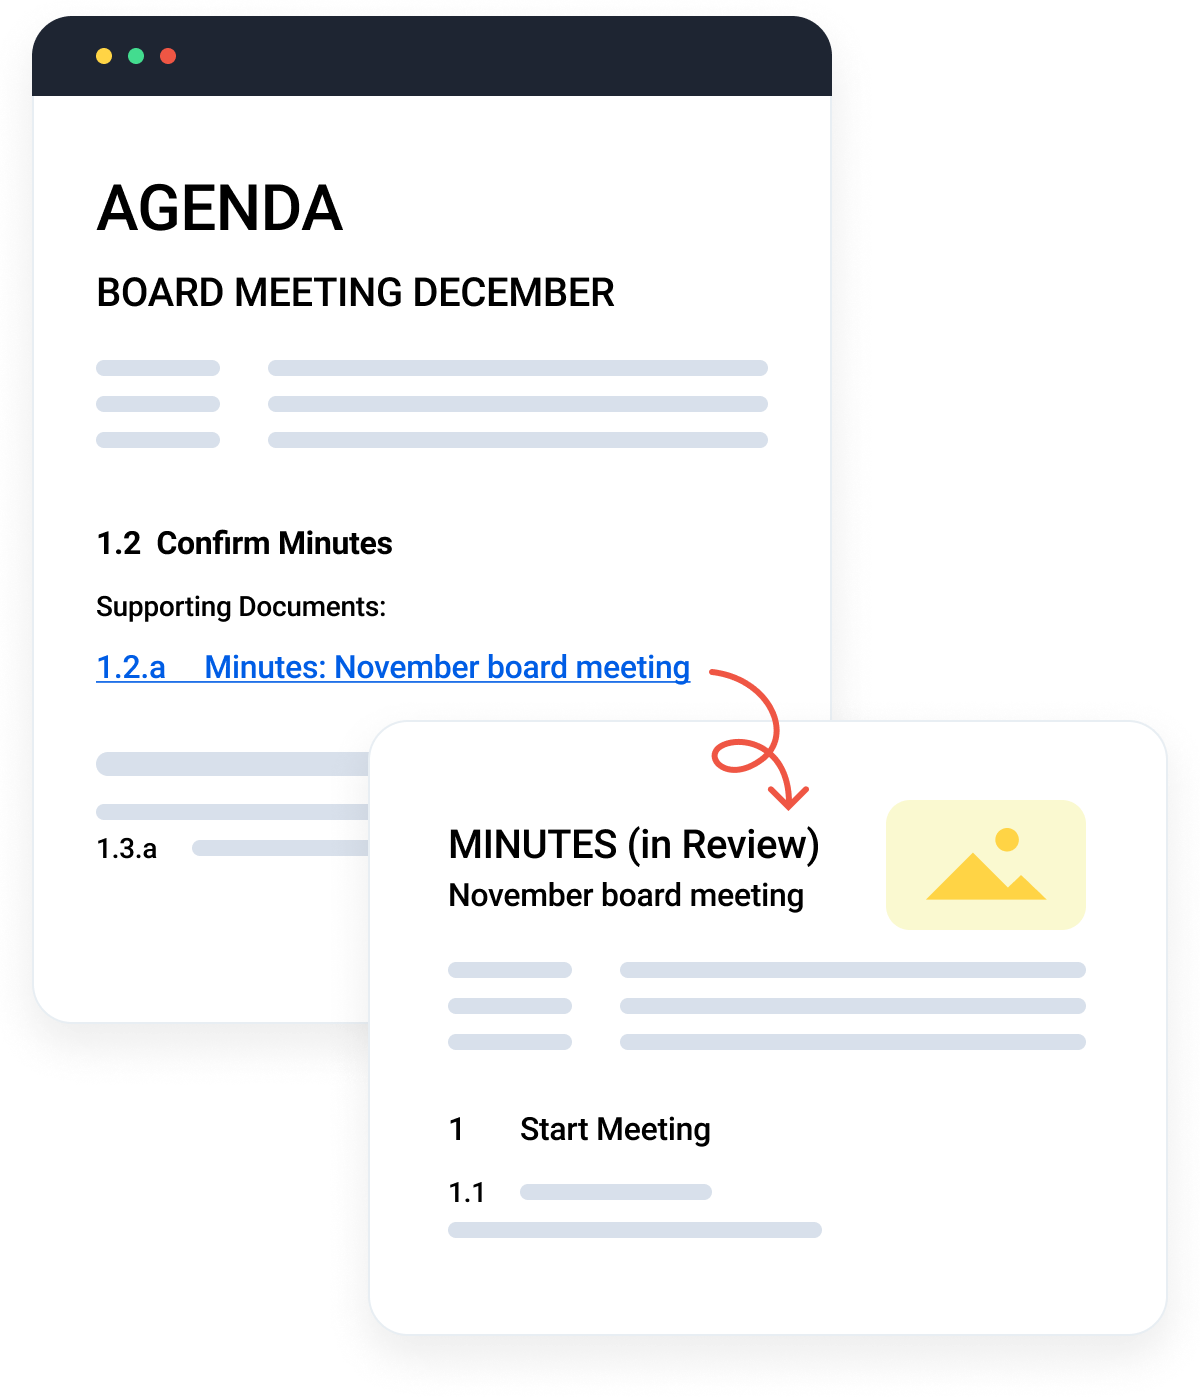 hyperlinked board meeting agenda and meeting documents in an easy to read board pack